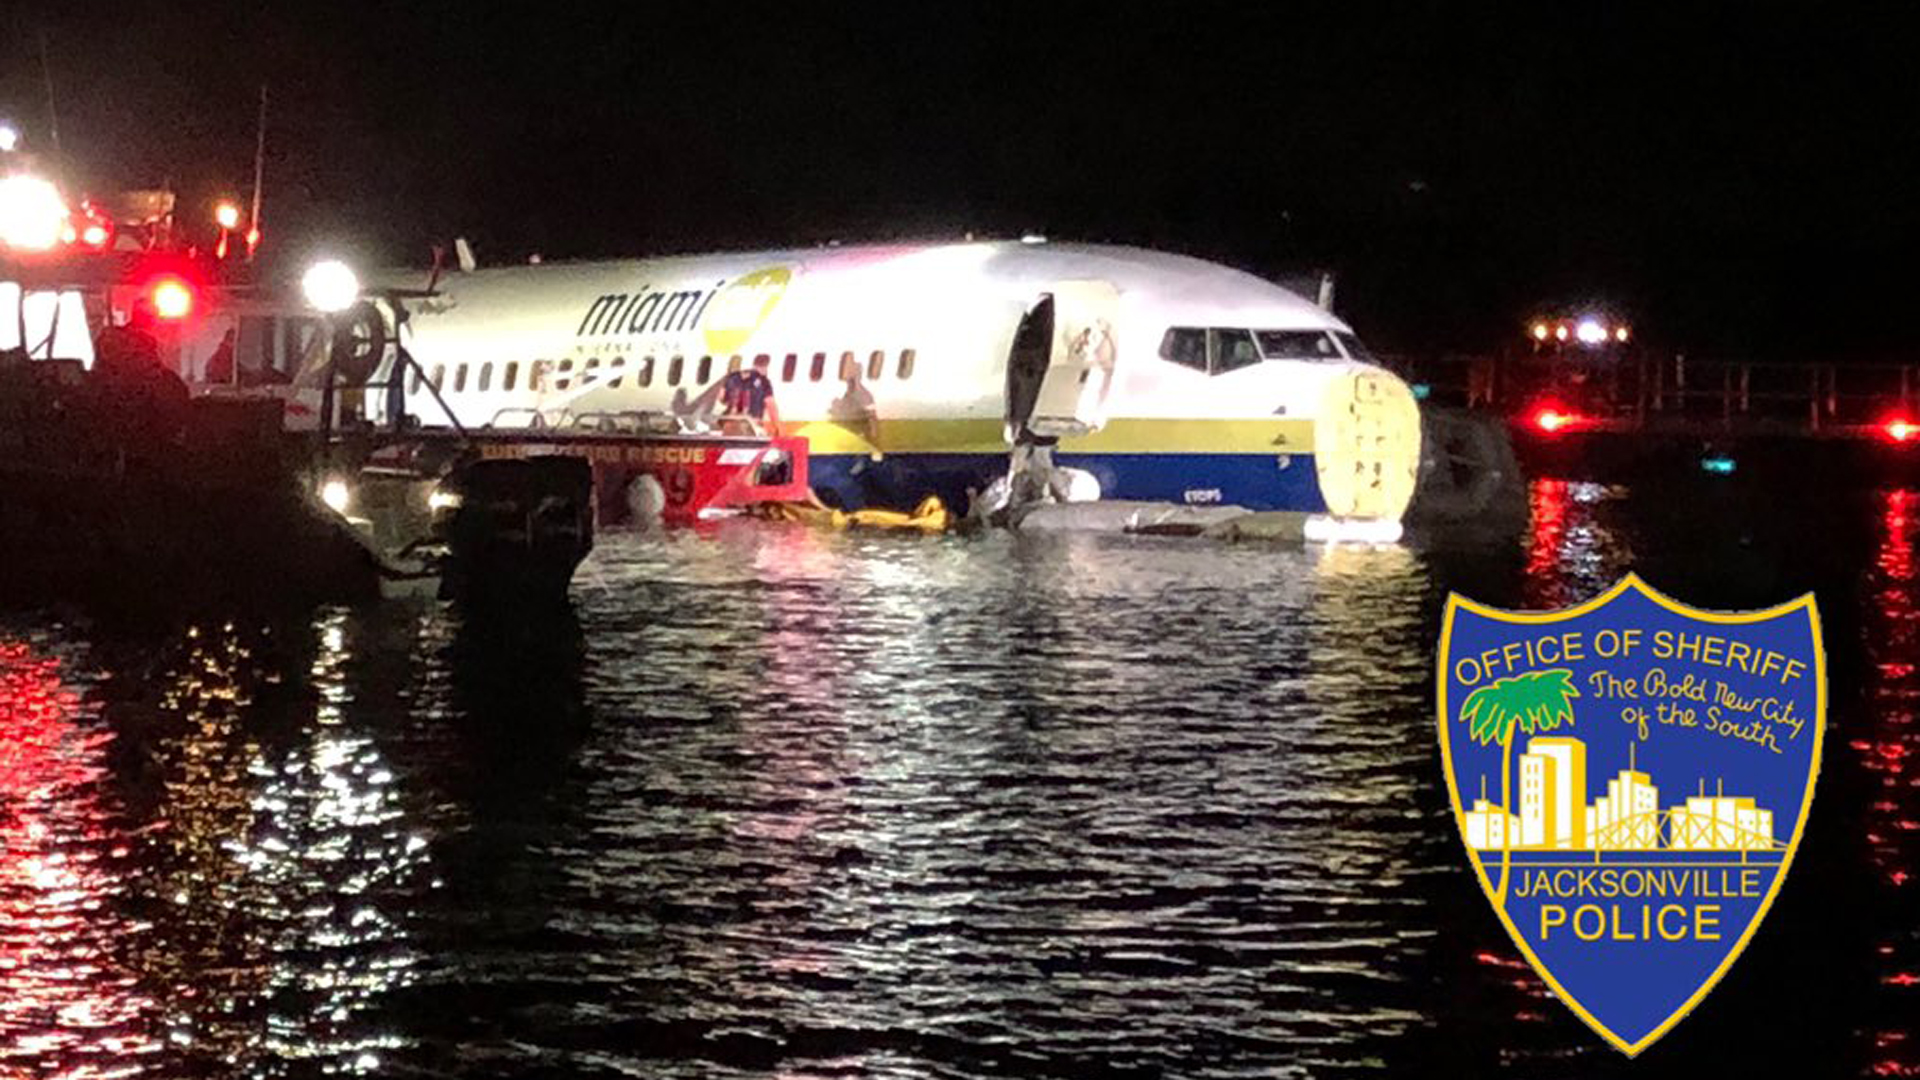 No fatalities were reported when a jetliner went down in the St. Johns River in Jacksonville, Florida on May 3, 2019. (Credit: Jacksonville Sheriff's Office)